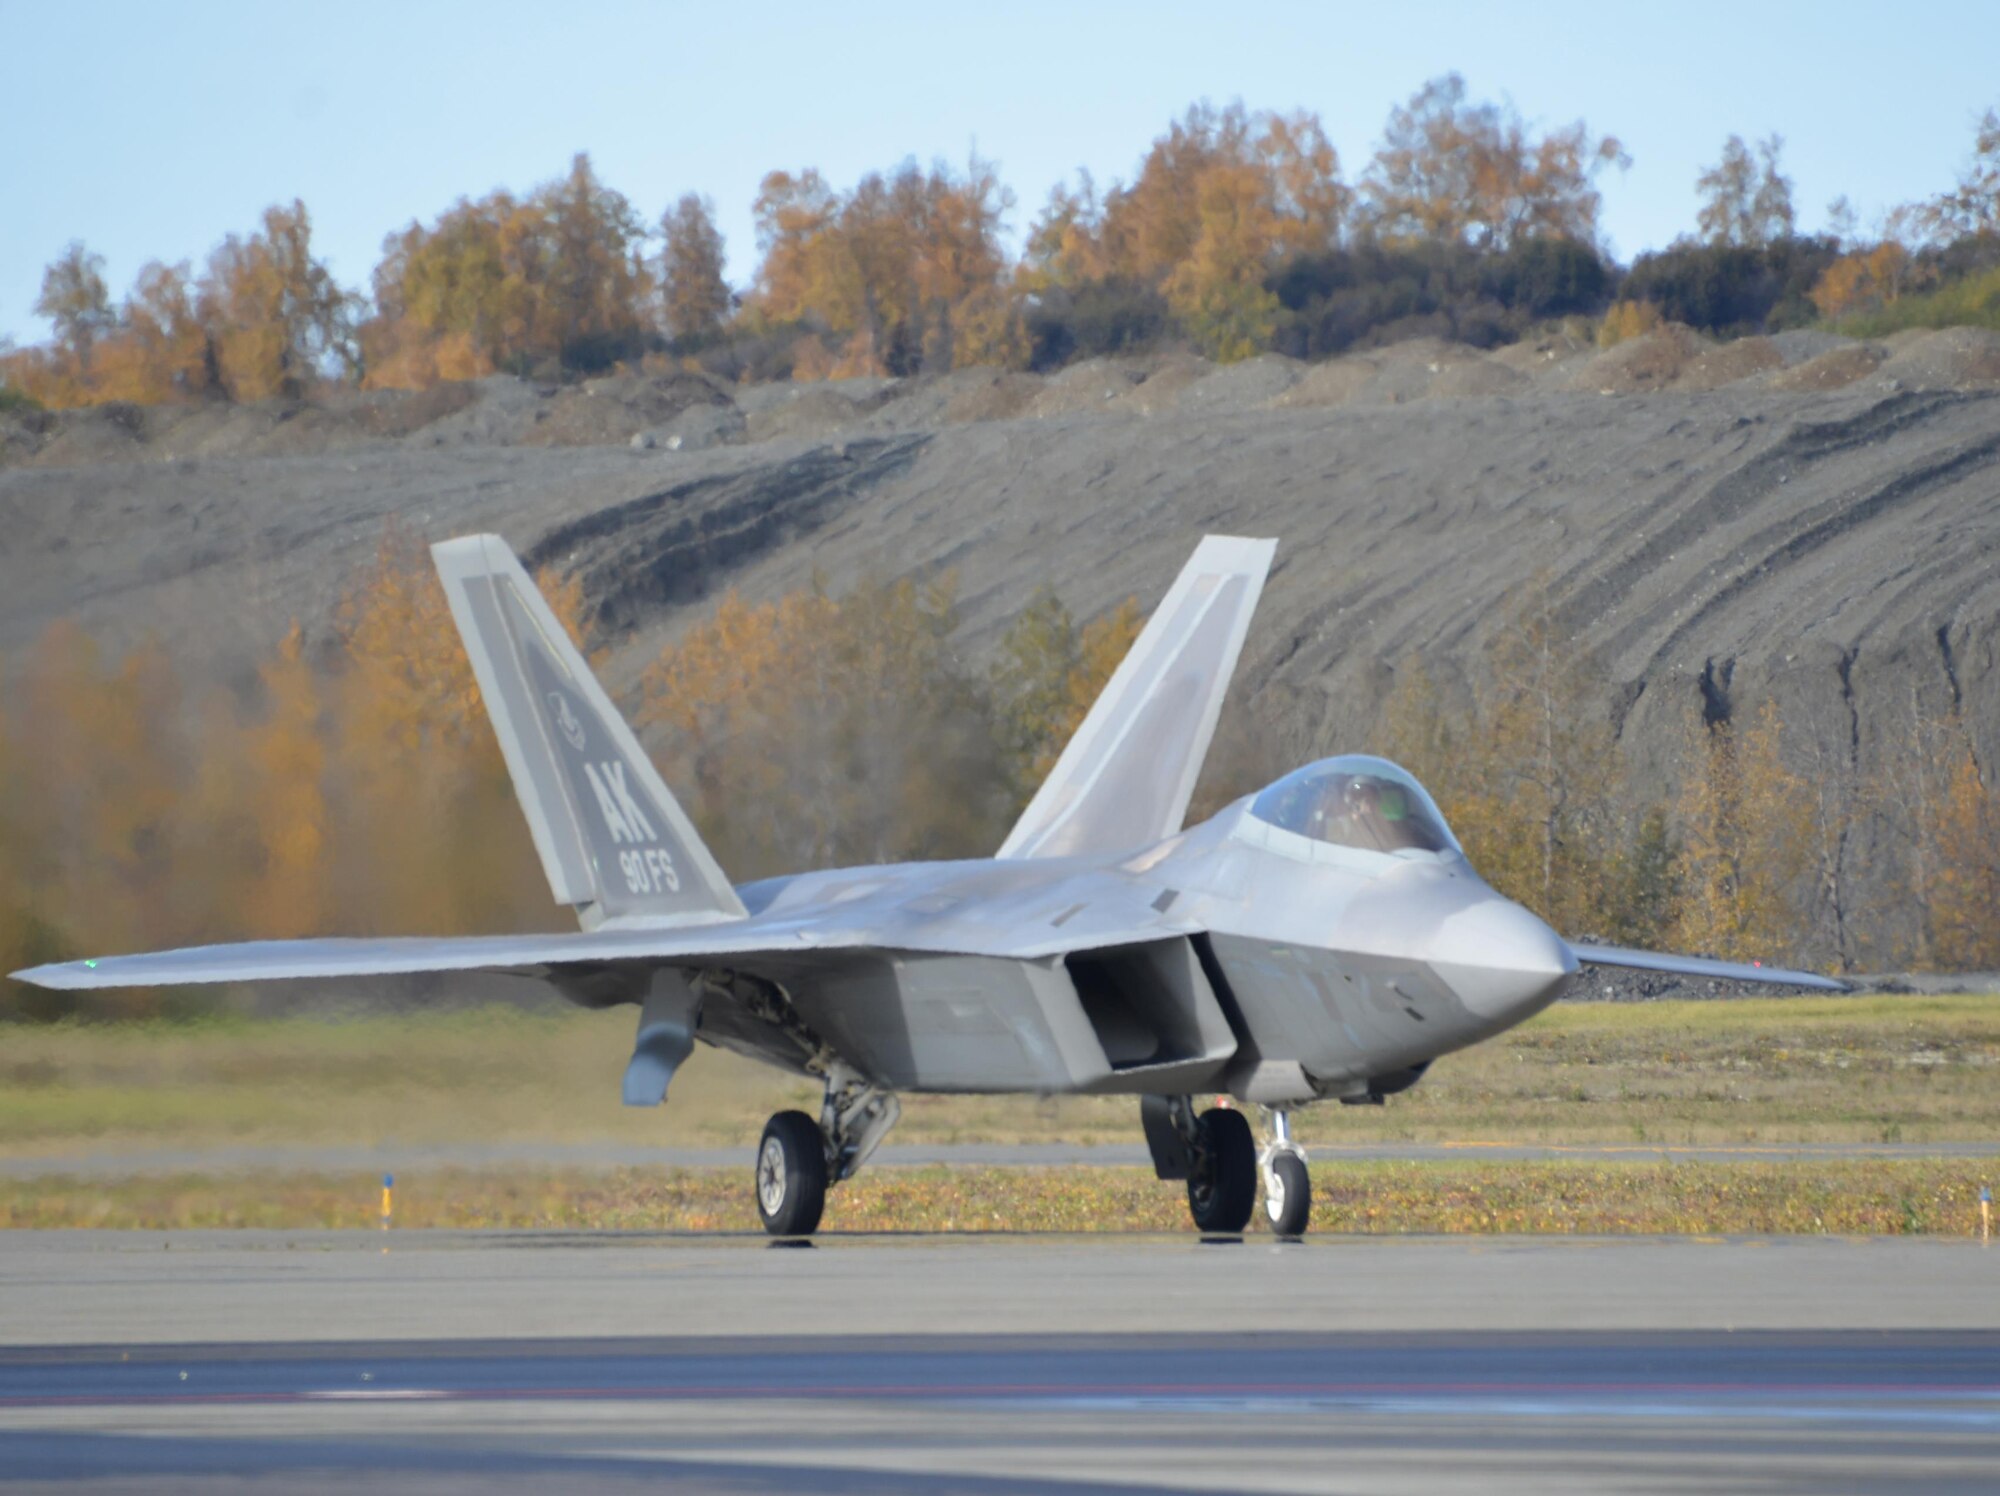 F-22 Raptor images from the 90th Fighter Squadron, October 2016 at Joint Base Elmendorf-Richardson, Alaska. (Photos by Staff Sgt. Mike Campbell) (Released)